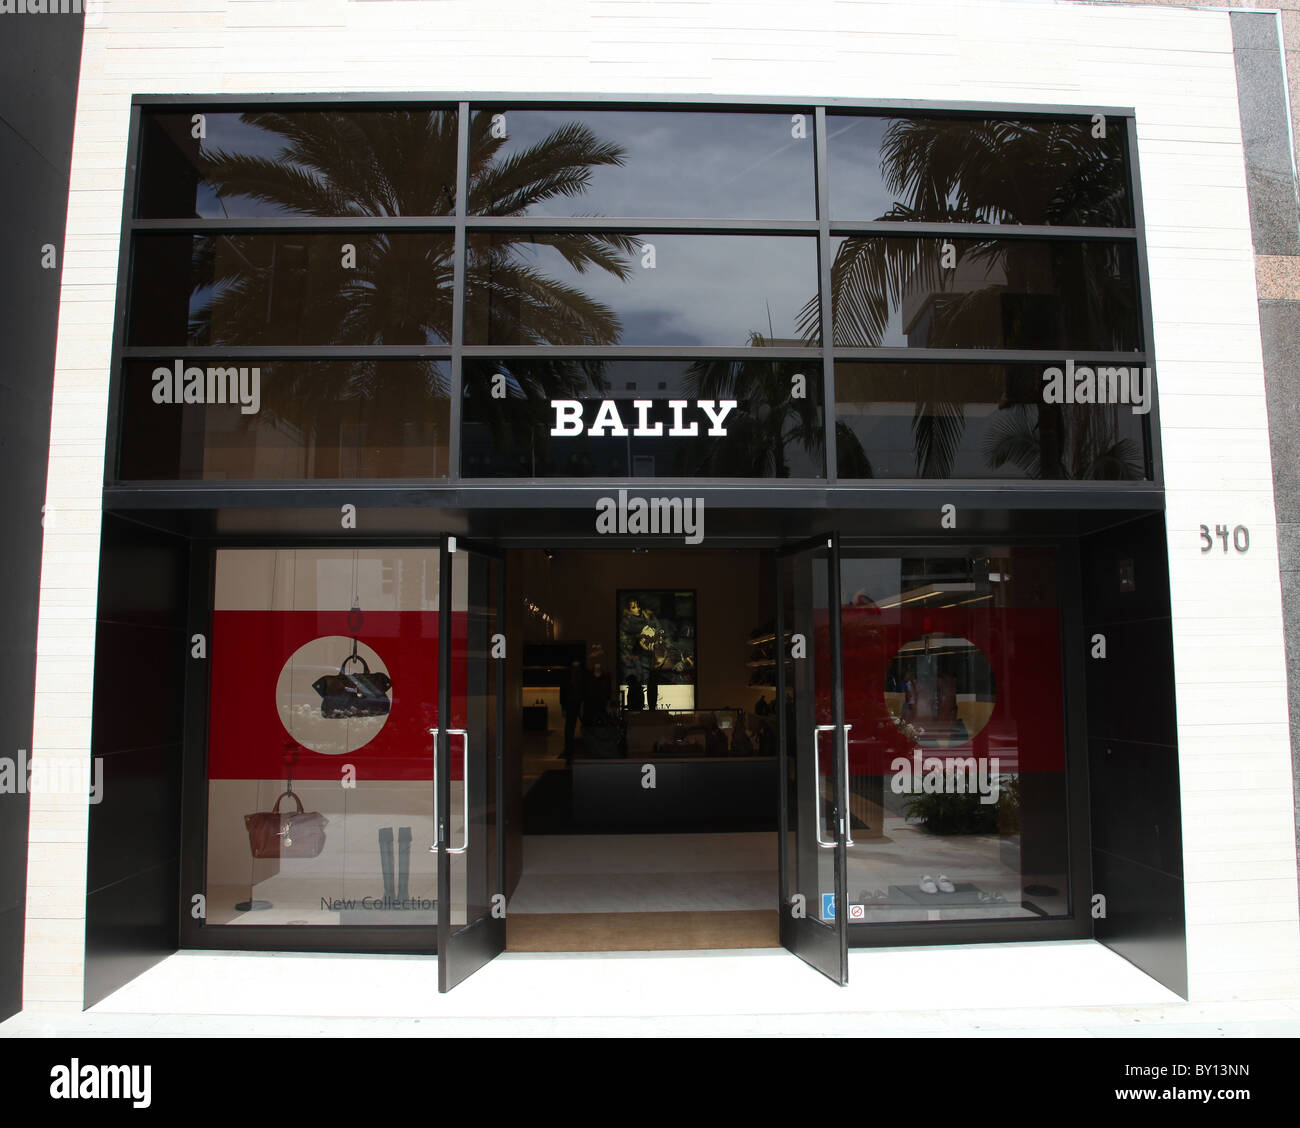 BALLY BEVERLY HILLS 340 N. RODEO DRIVE BEVERLY HILLS CALIFONIA USA BEVERLY  HILLS STORE 01 August 2010 Stock Photo - Alamy